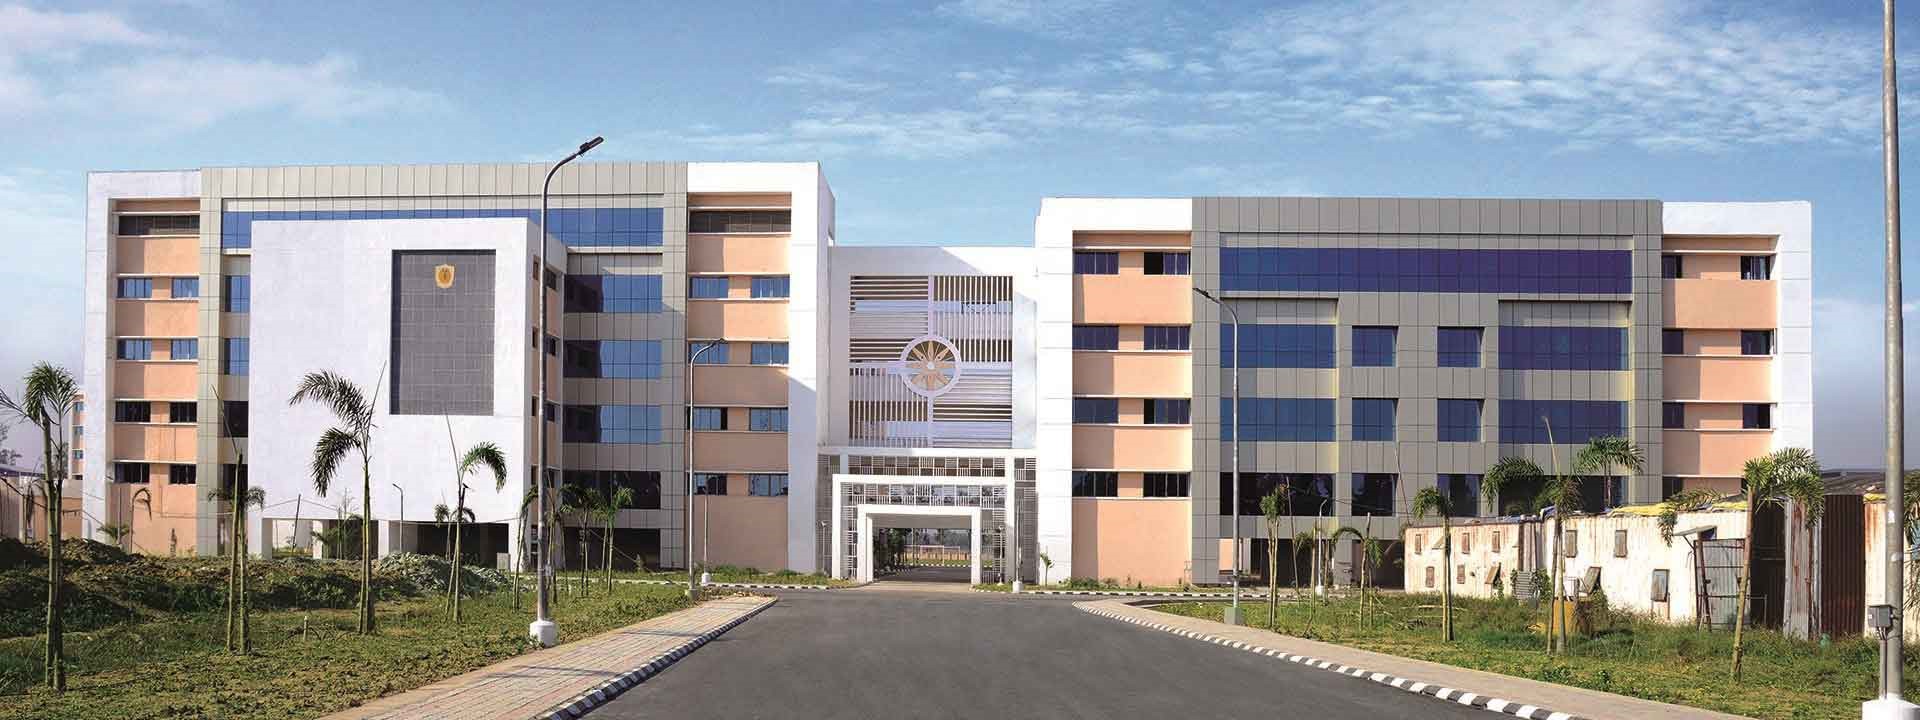 Fakir Mohan Medical college in Odisha- L&T Construction